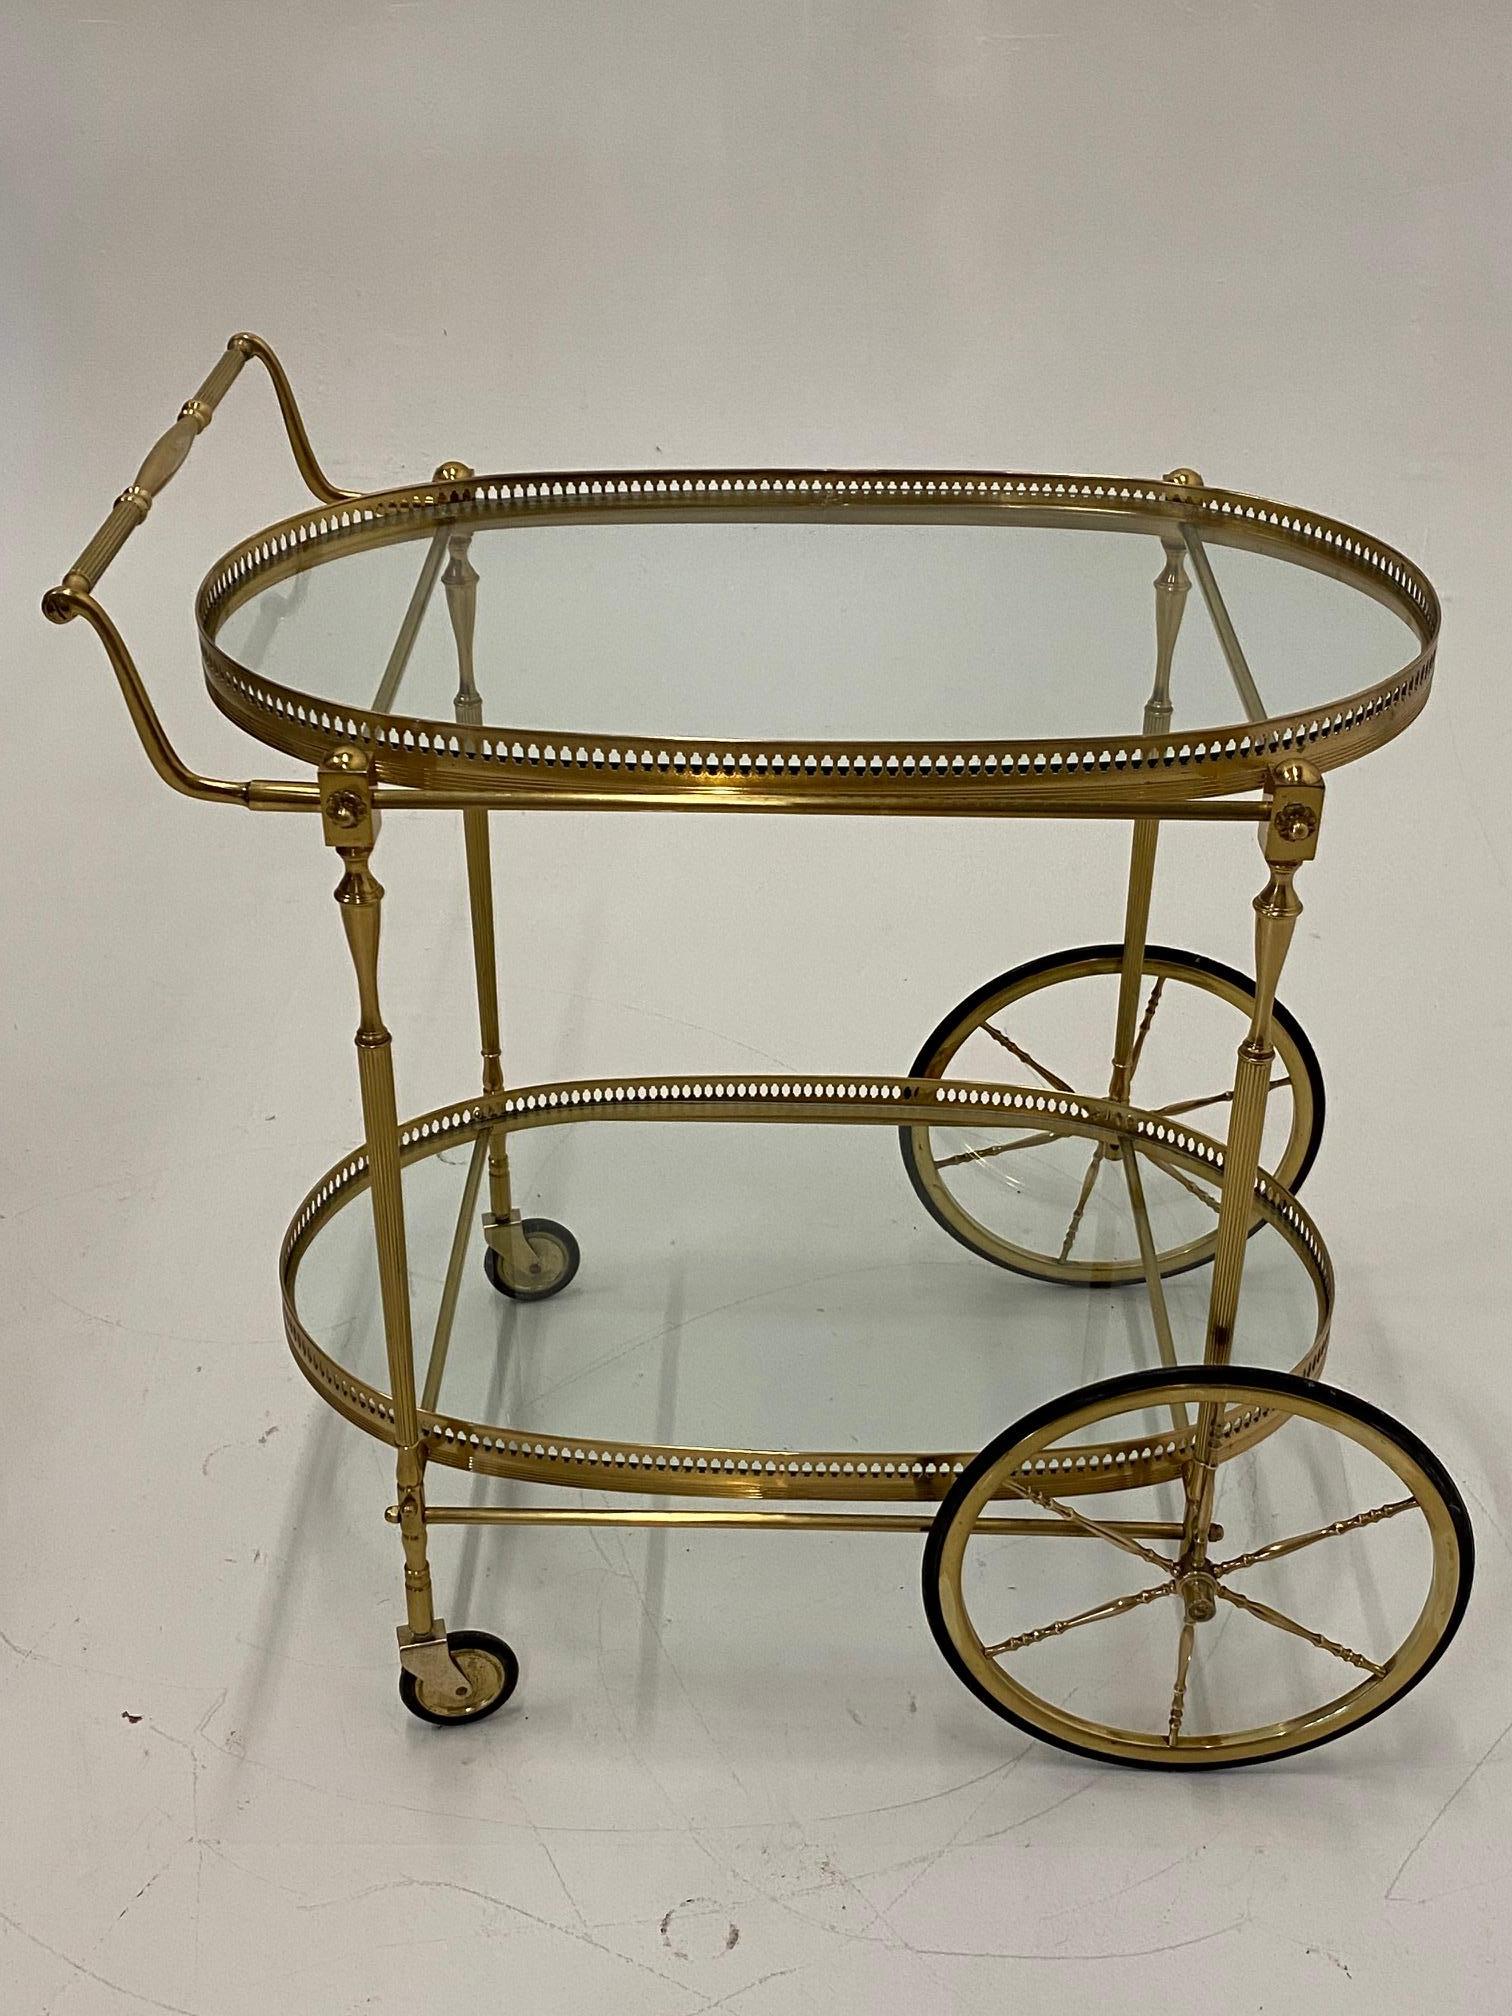 LaBarge elegant solid brass vintage bar cart having two oval glass tiers with gallery surrounds. 
Measures: 30 H to handle
28 H to top tier gallery
9.5 H to bottom tier gallery.
 